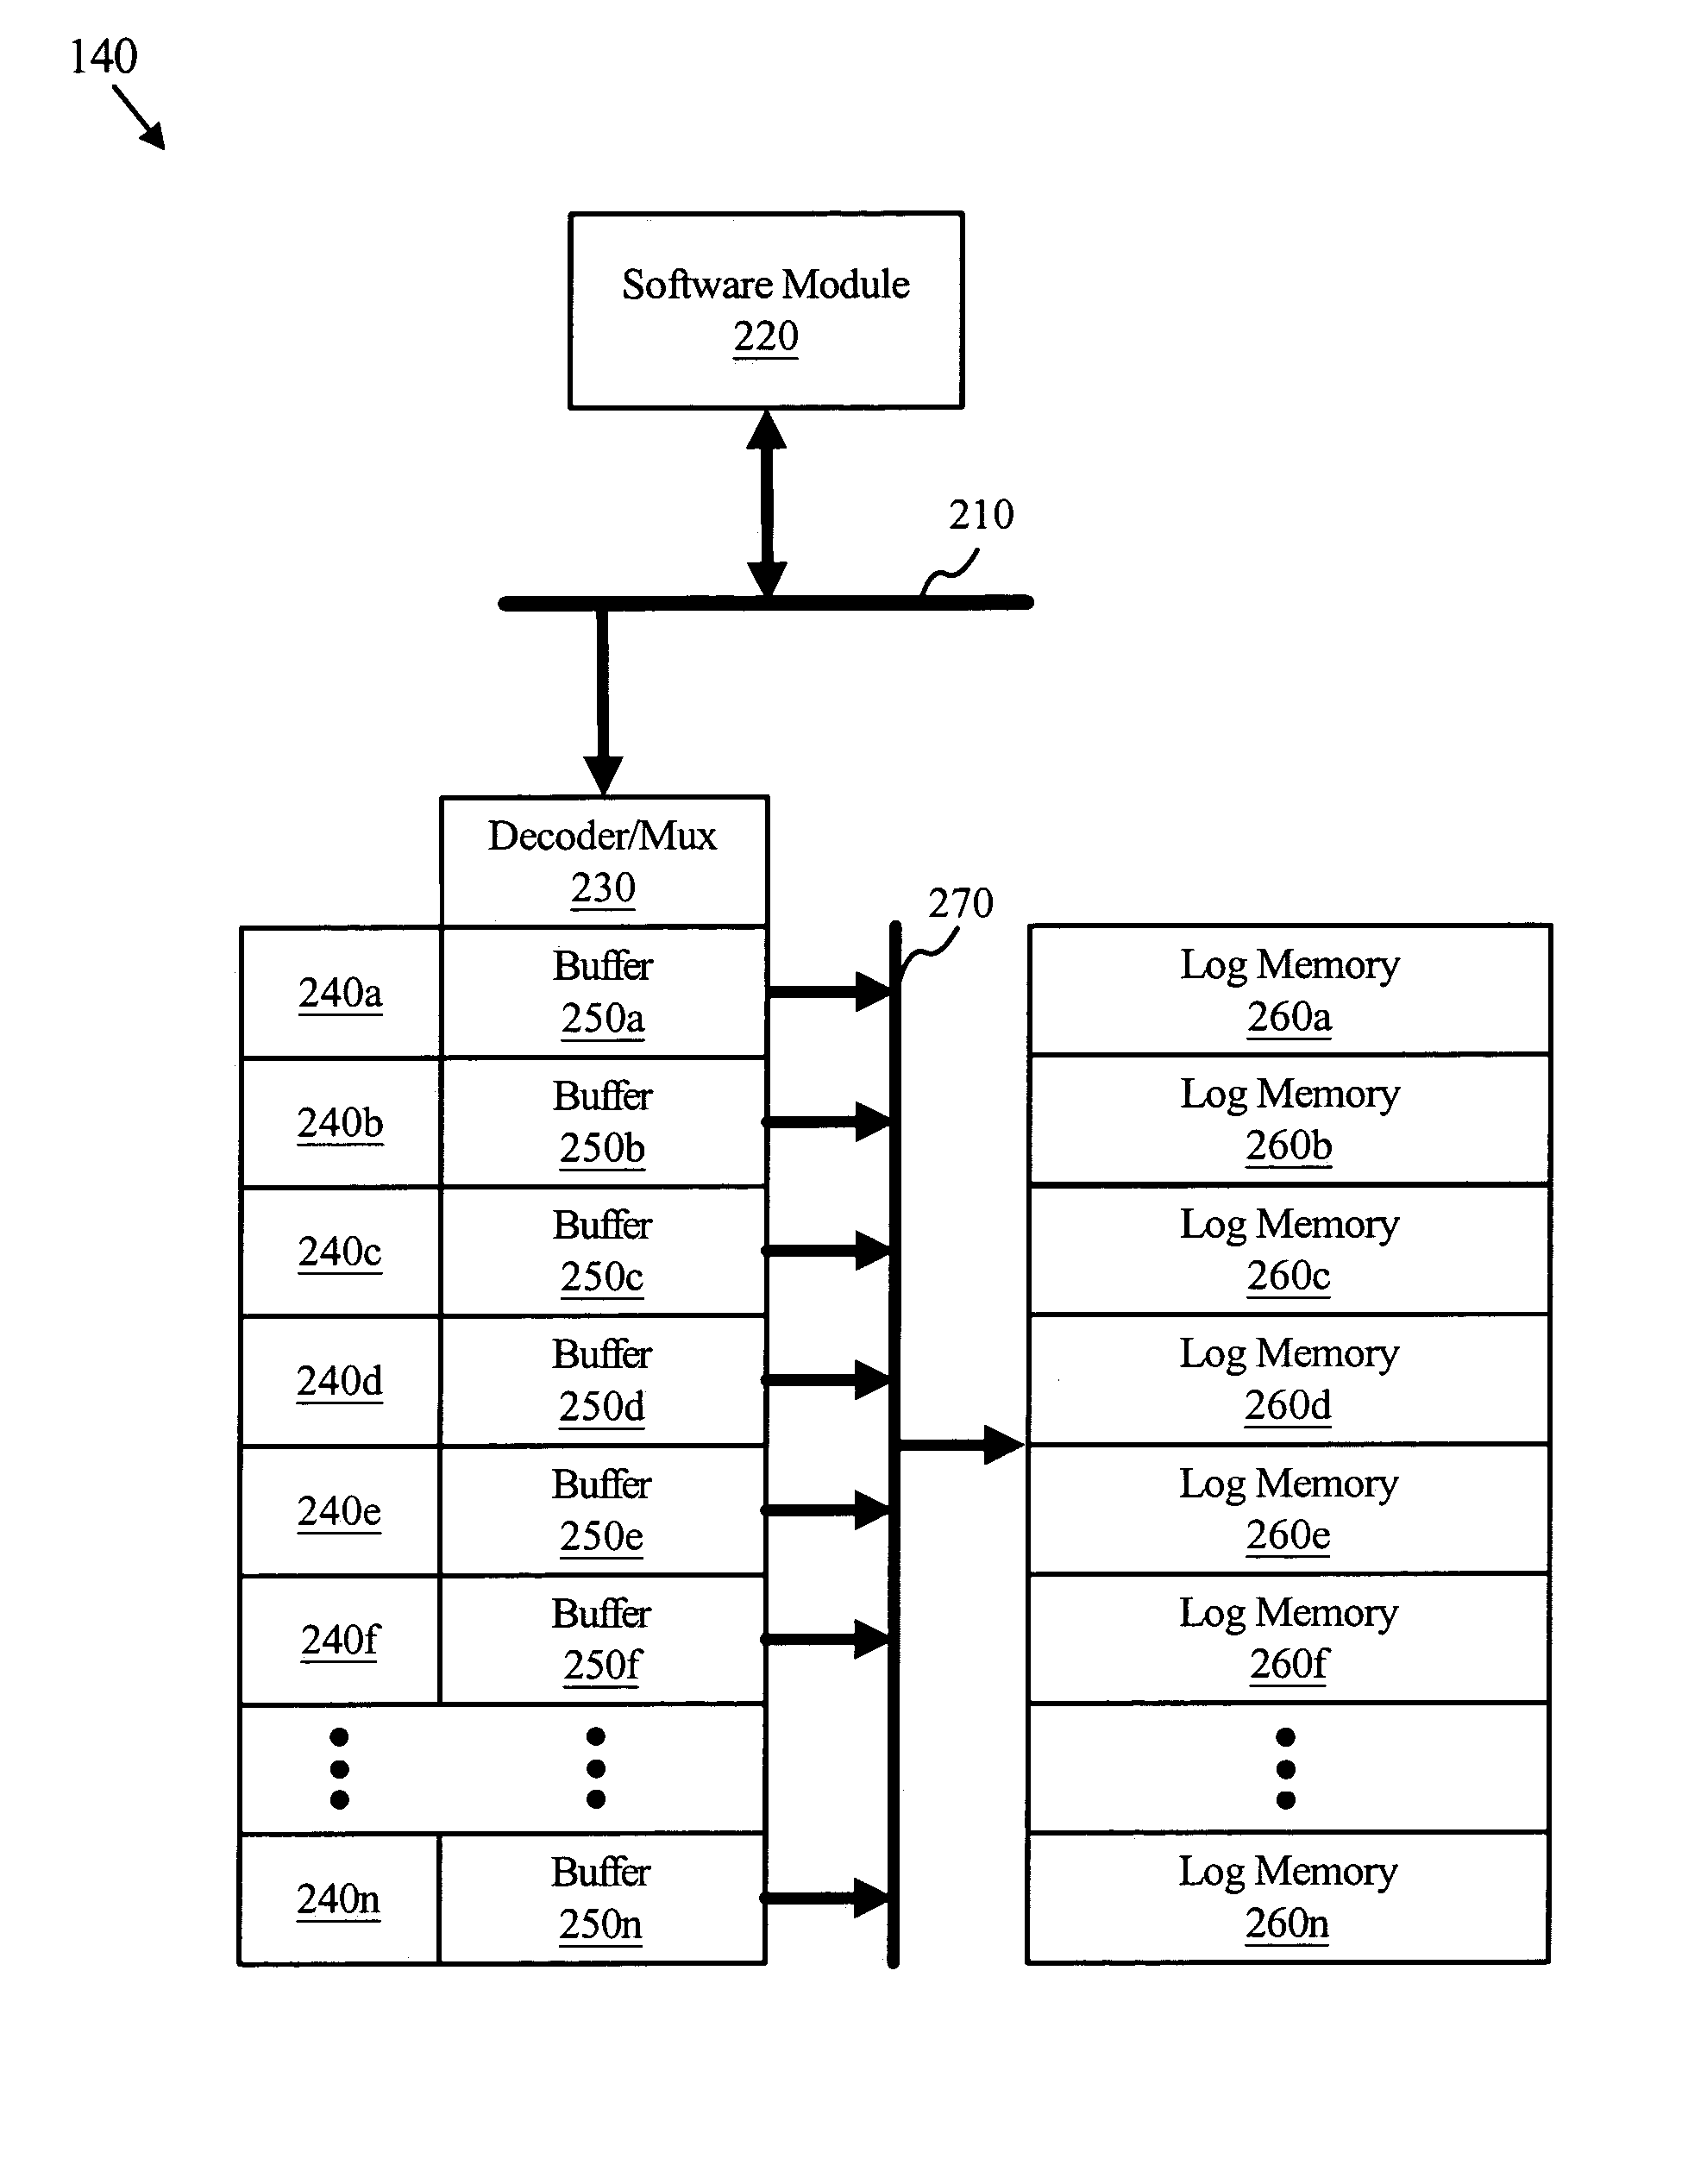 Apparatus, method, and system for logging diagnostic information